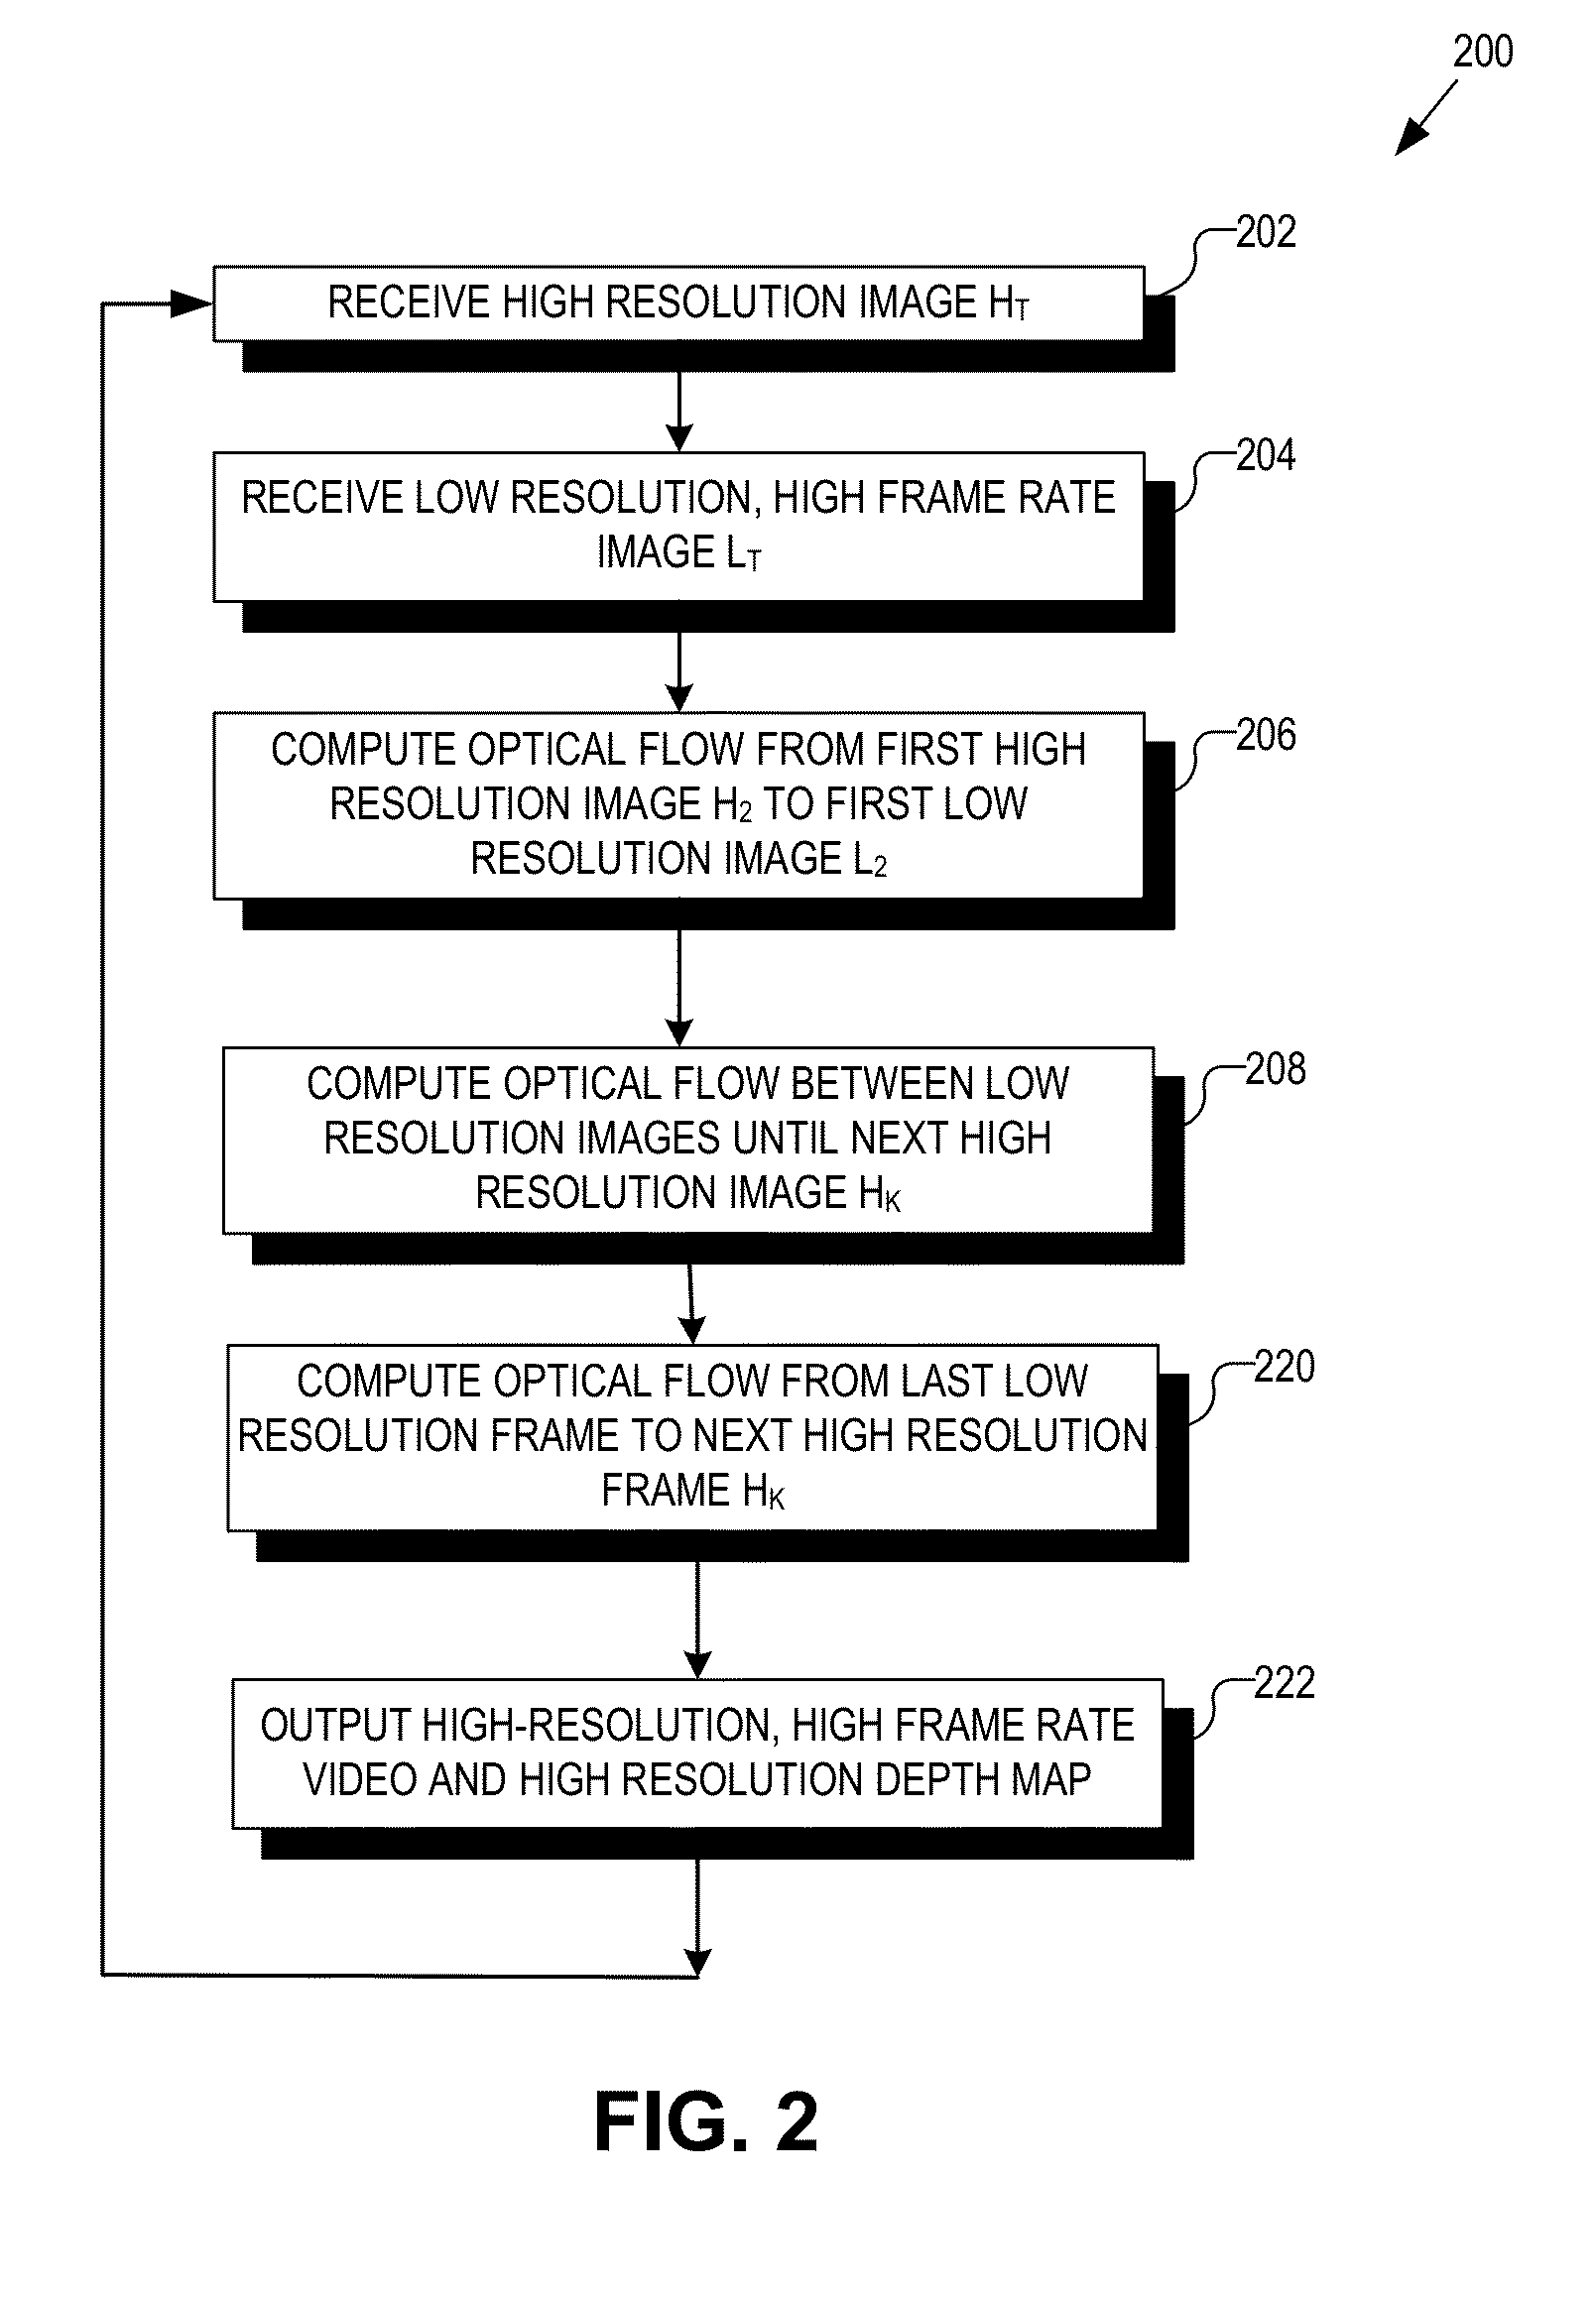 Adaptive resolution in optical flow computations for an image processing system